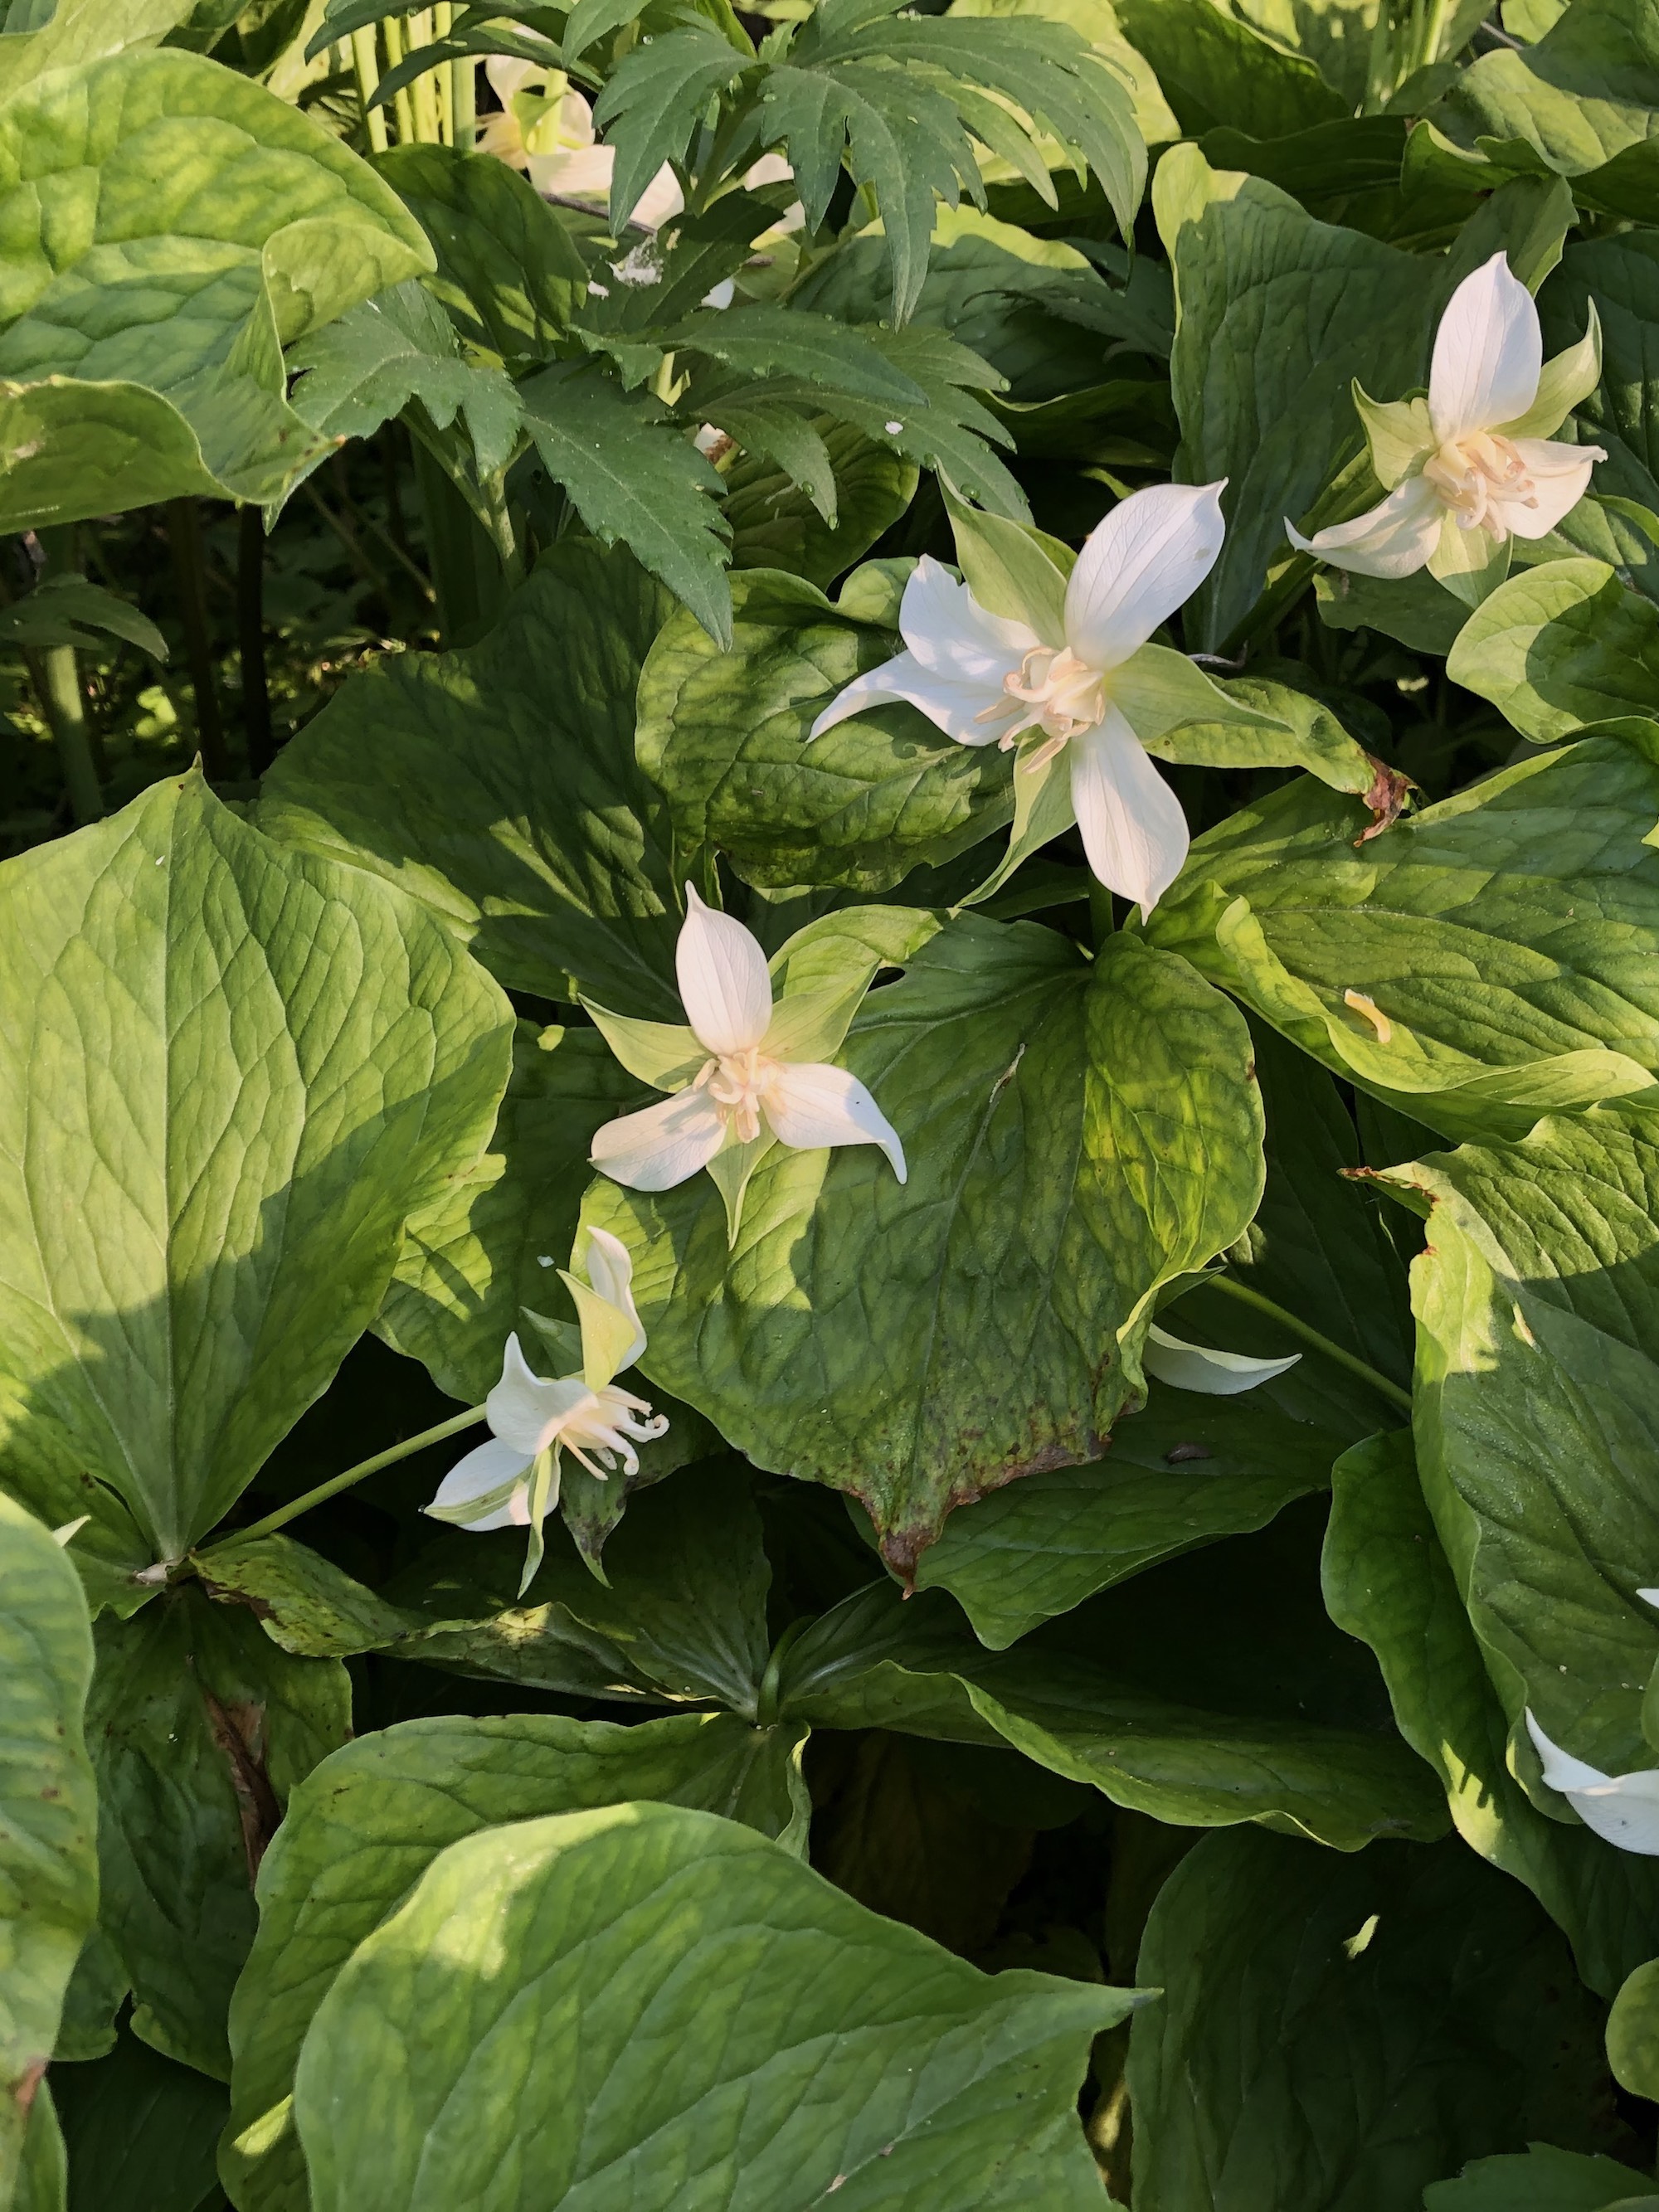 Drooping Trillium near Council Ring Spring in Madison, Wisconsin on May 14, 2021.